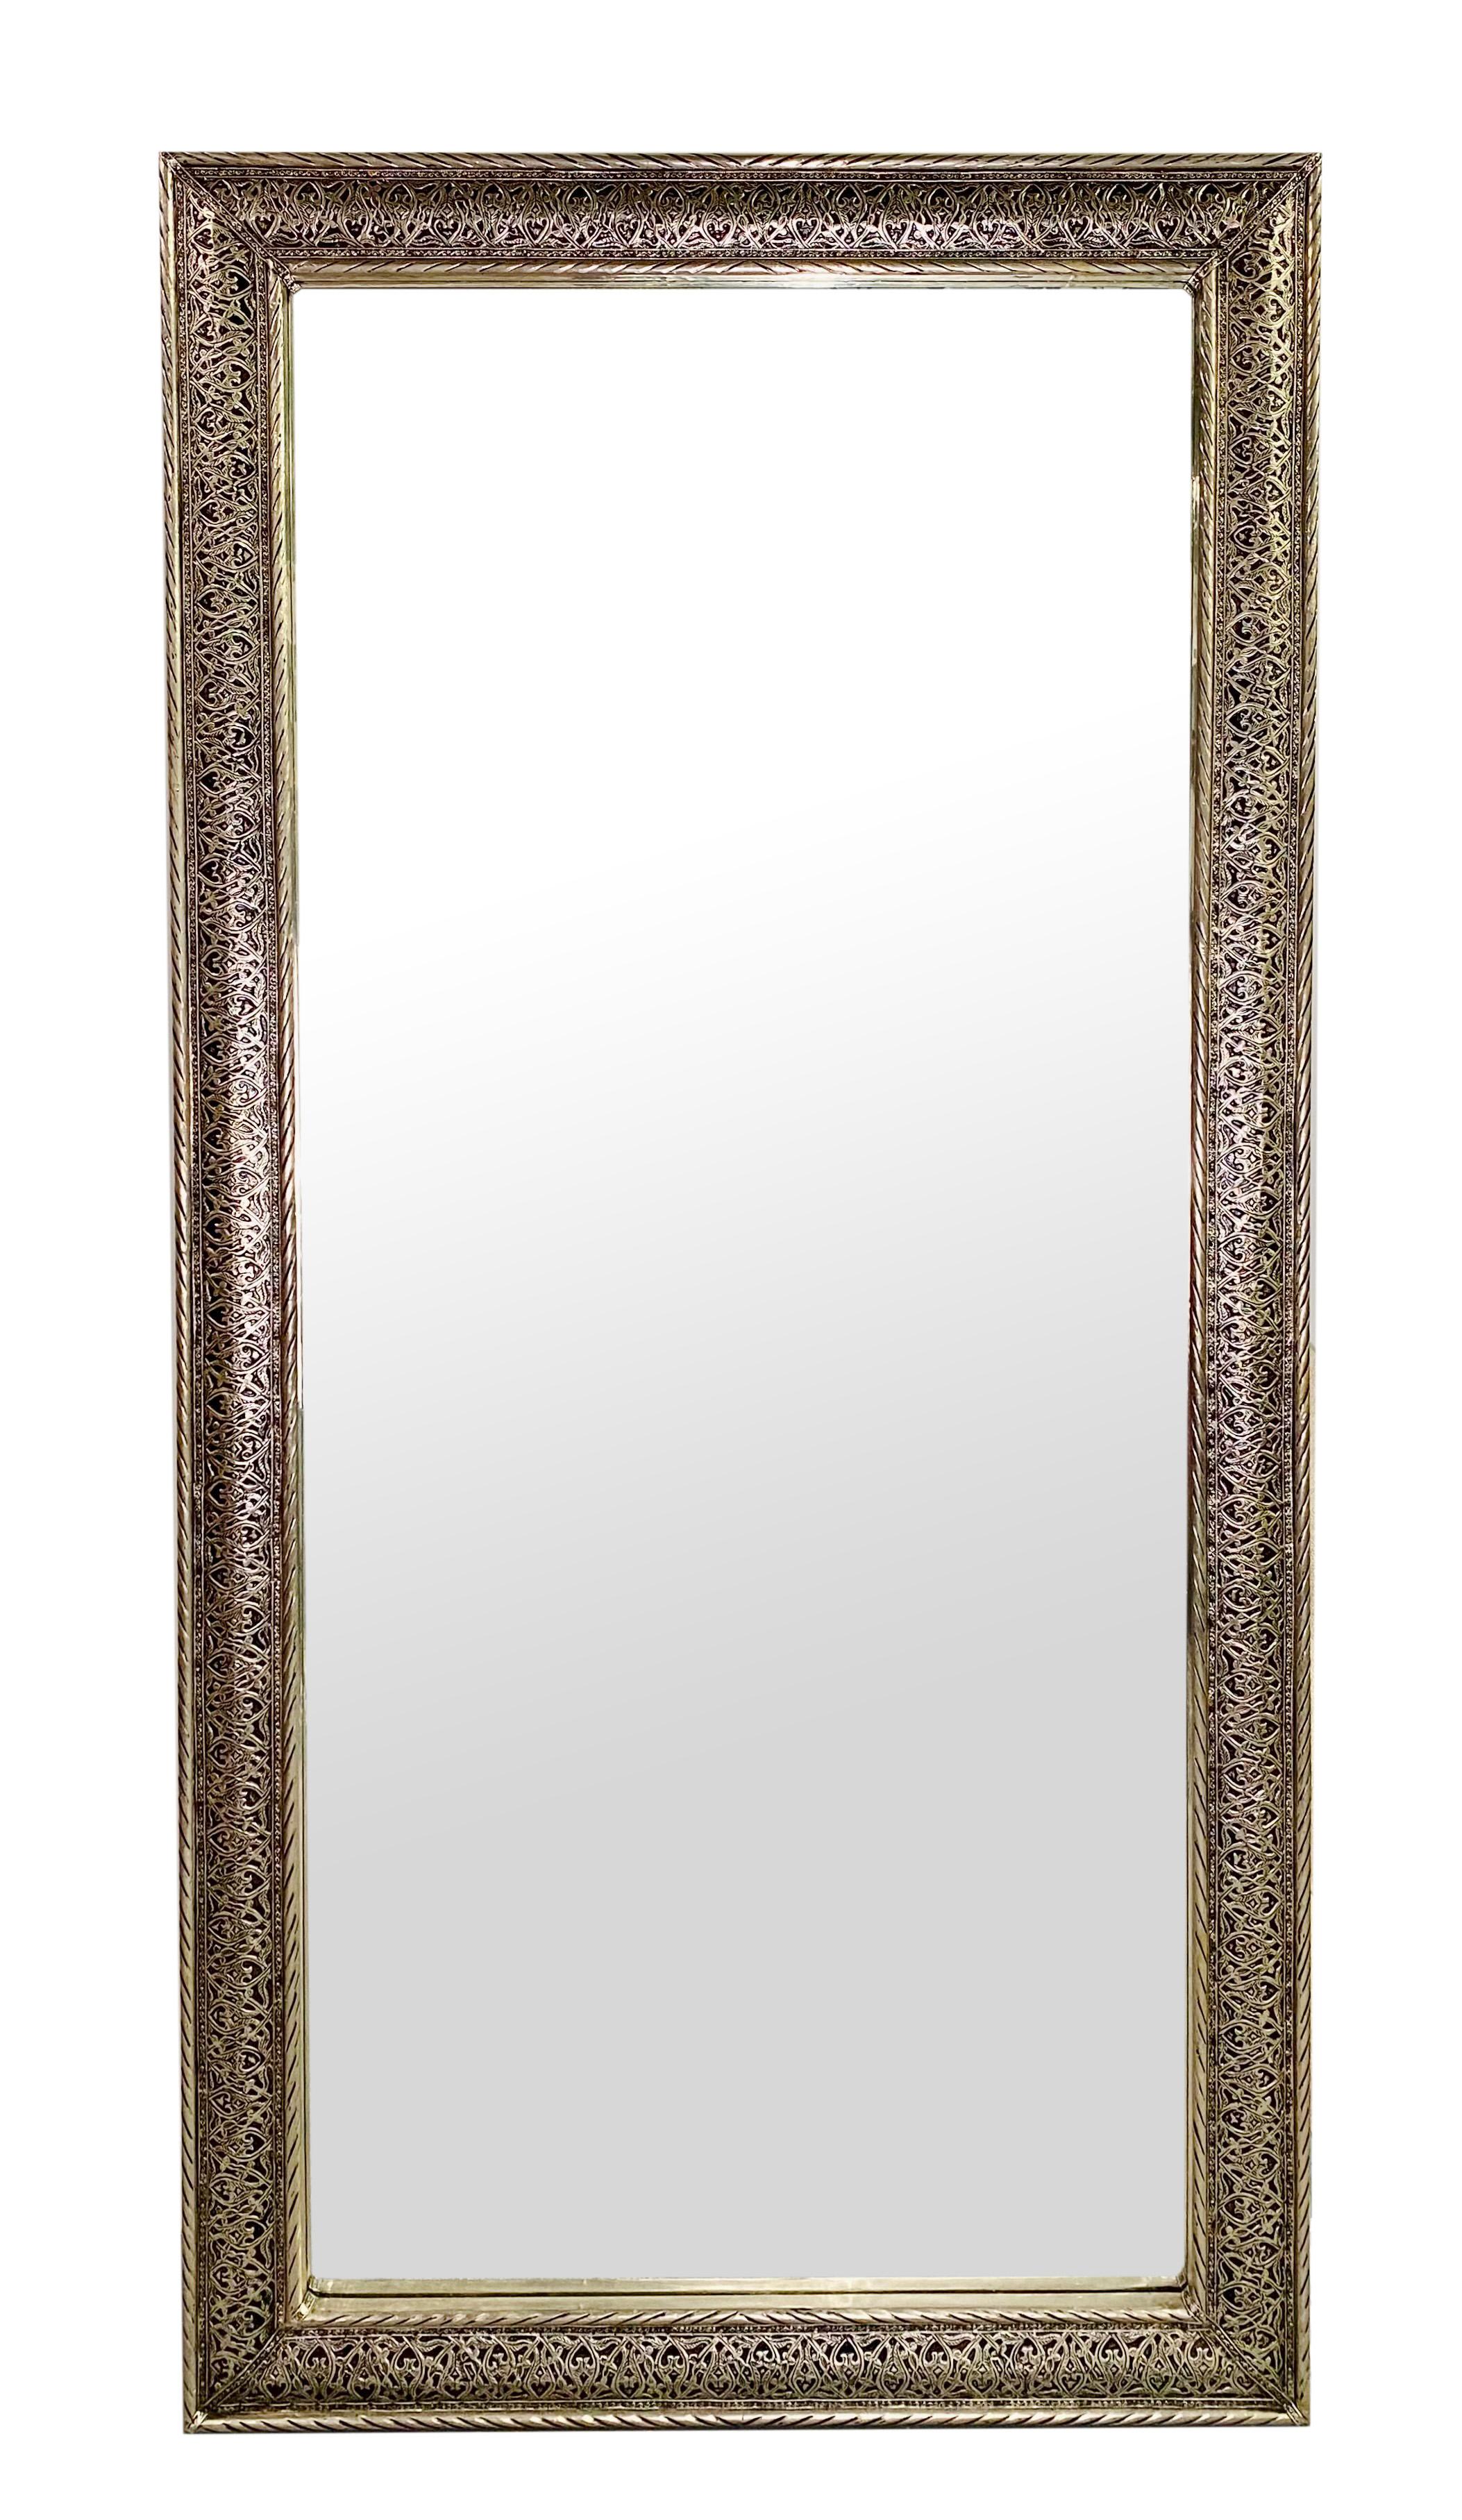 A pair of Hollywood Regency style large mirrors. The mirrors' frame is finely handmade in beautiful filigree design using the best of quality silvered brass material. The mirrors can be displayed as wall mirrors, floor mirrors and both horizontal